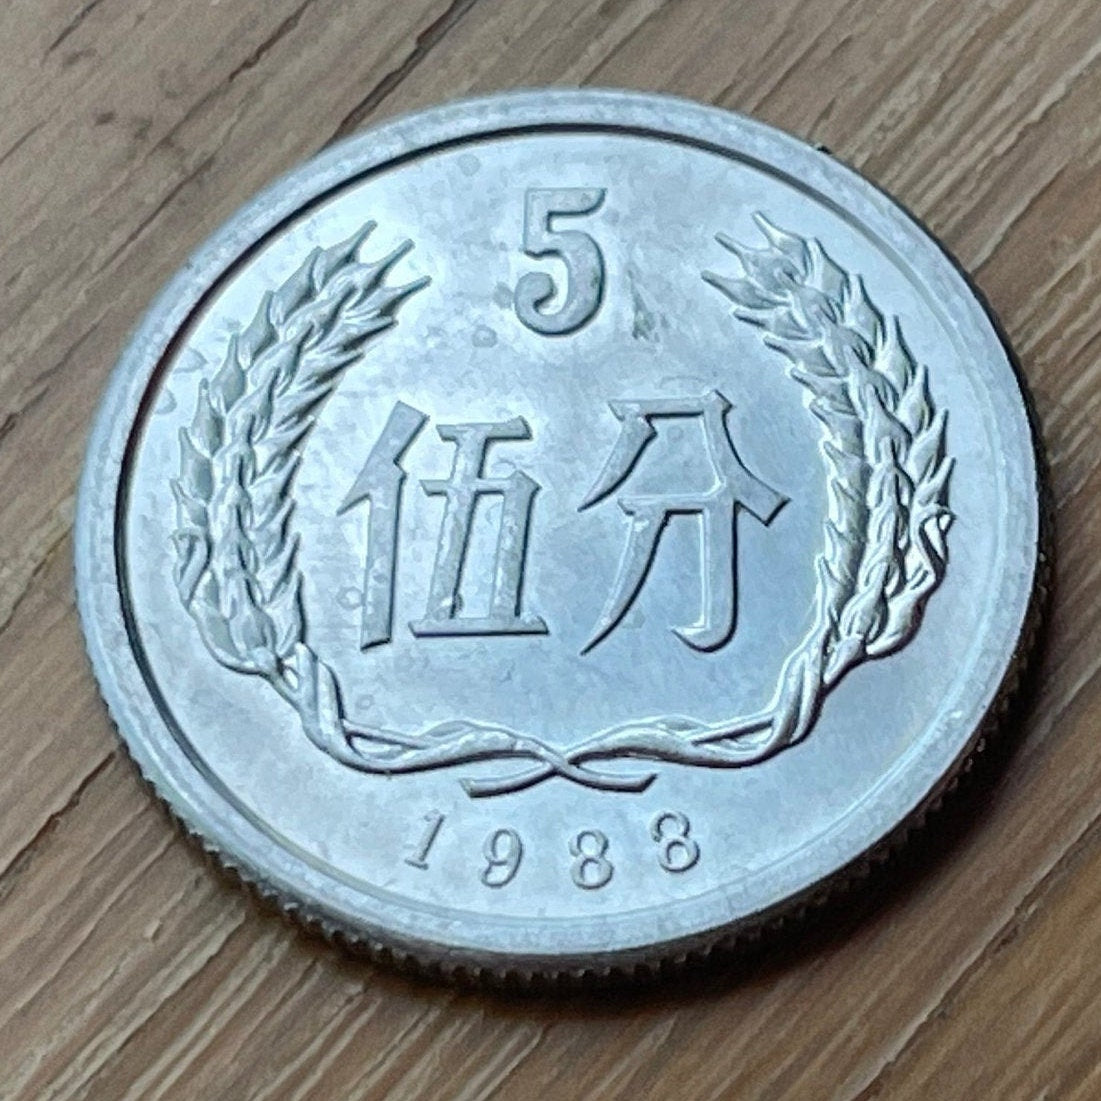 Tiananmen Gate 5 Fen China Authentic Coin Money for Jewelry and Craft Making (Gate of Heavenly Peace)